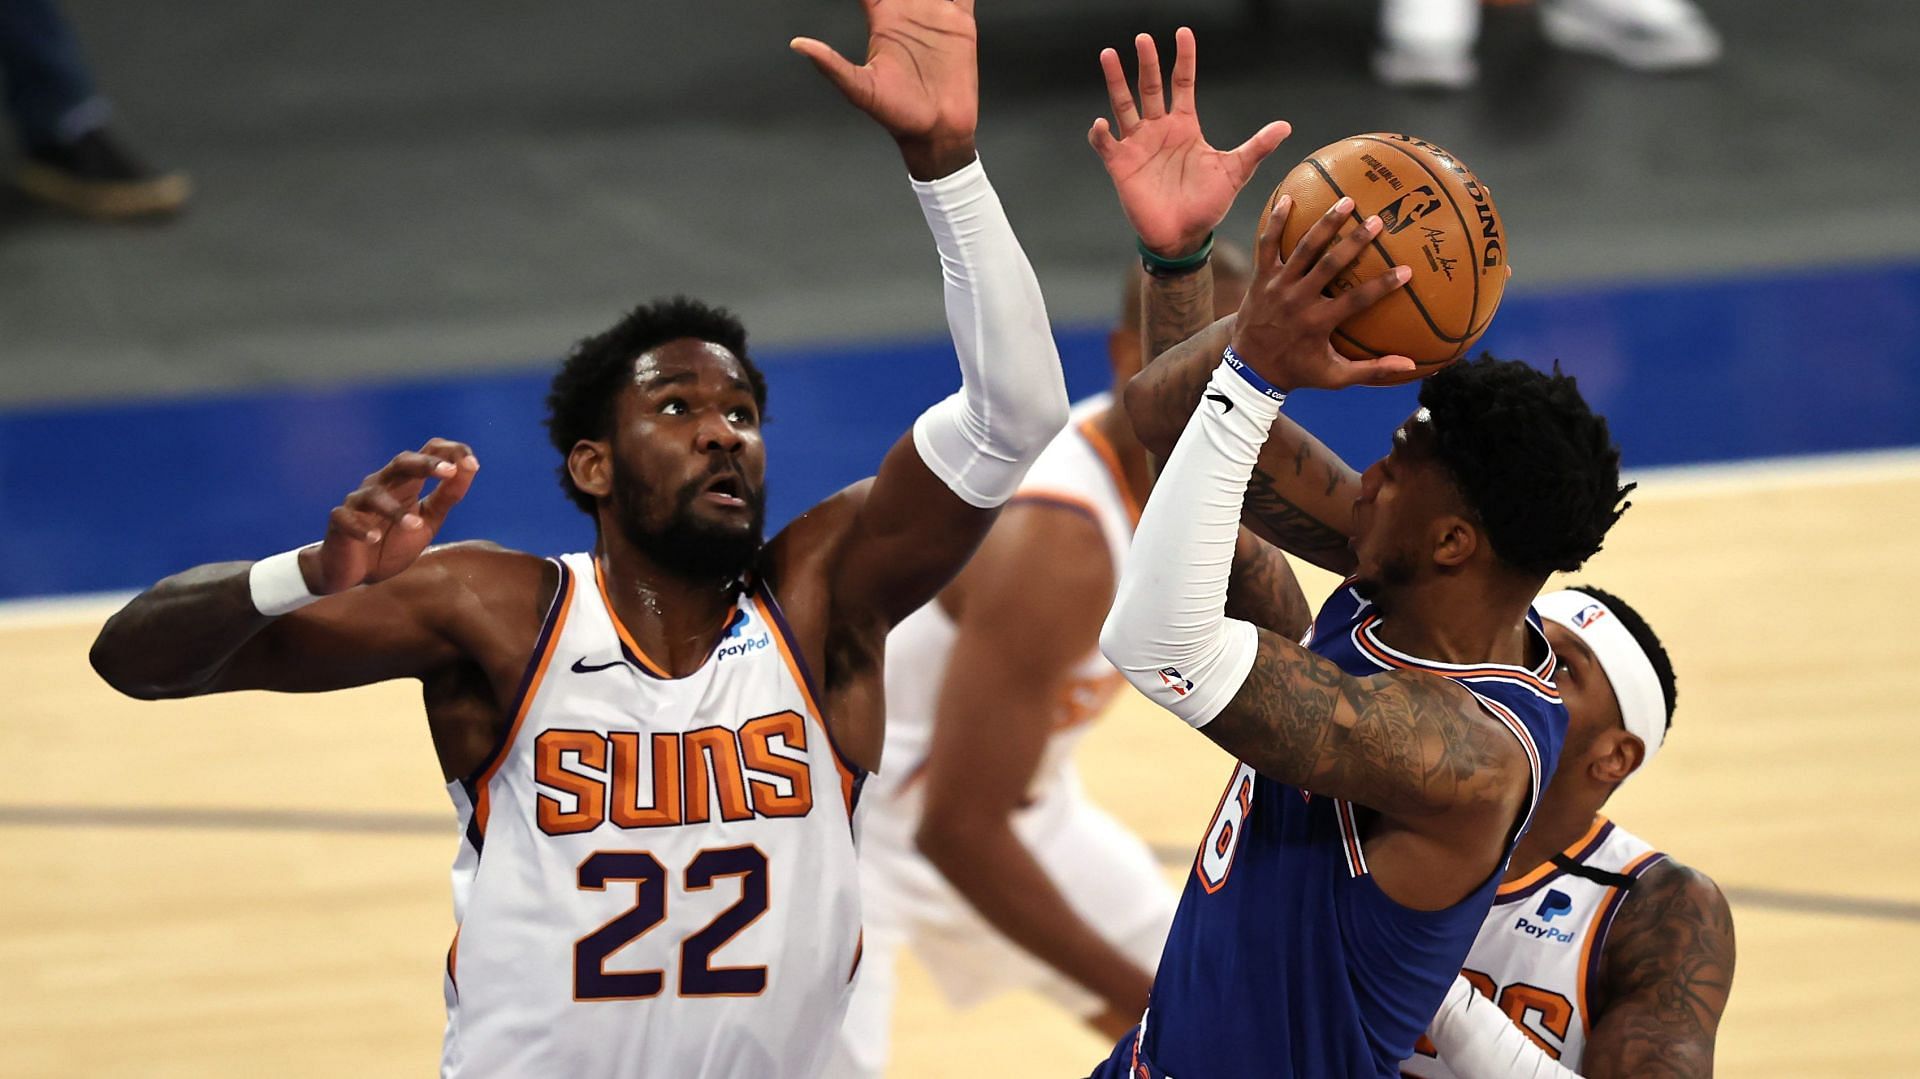 The undermanned Suns will look to complete a sweep of their season series against the Knicks on Friday. [Photo: Heavy.com]